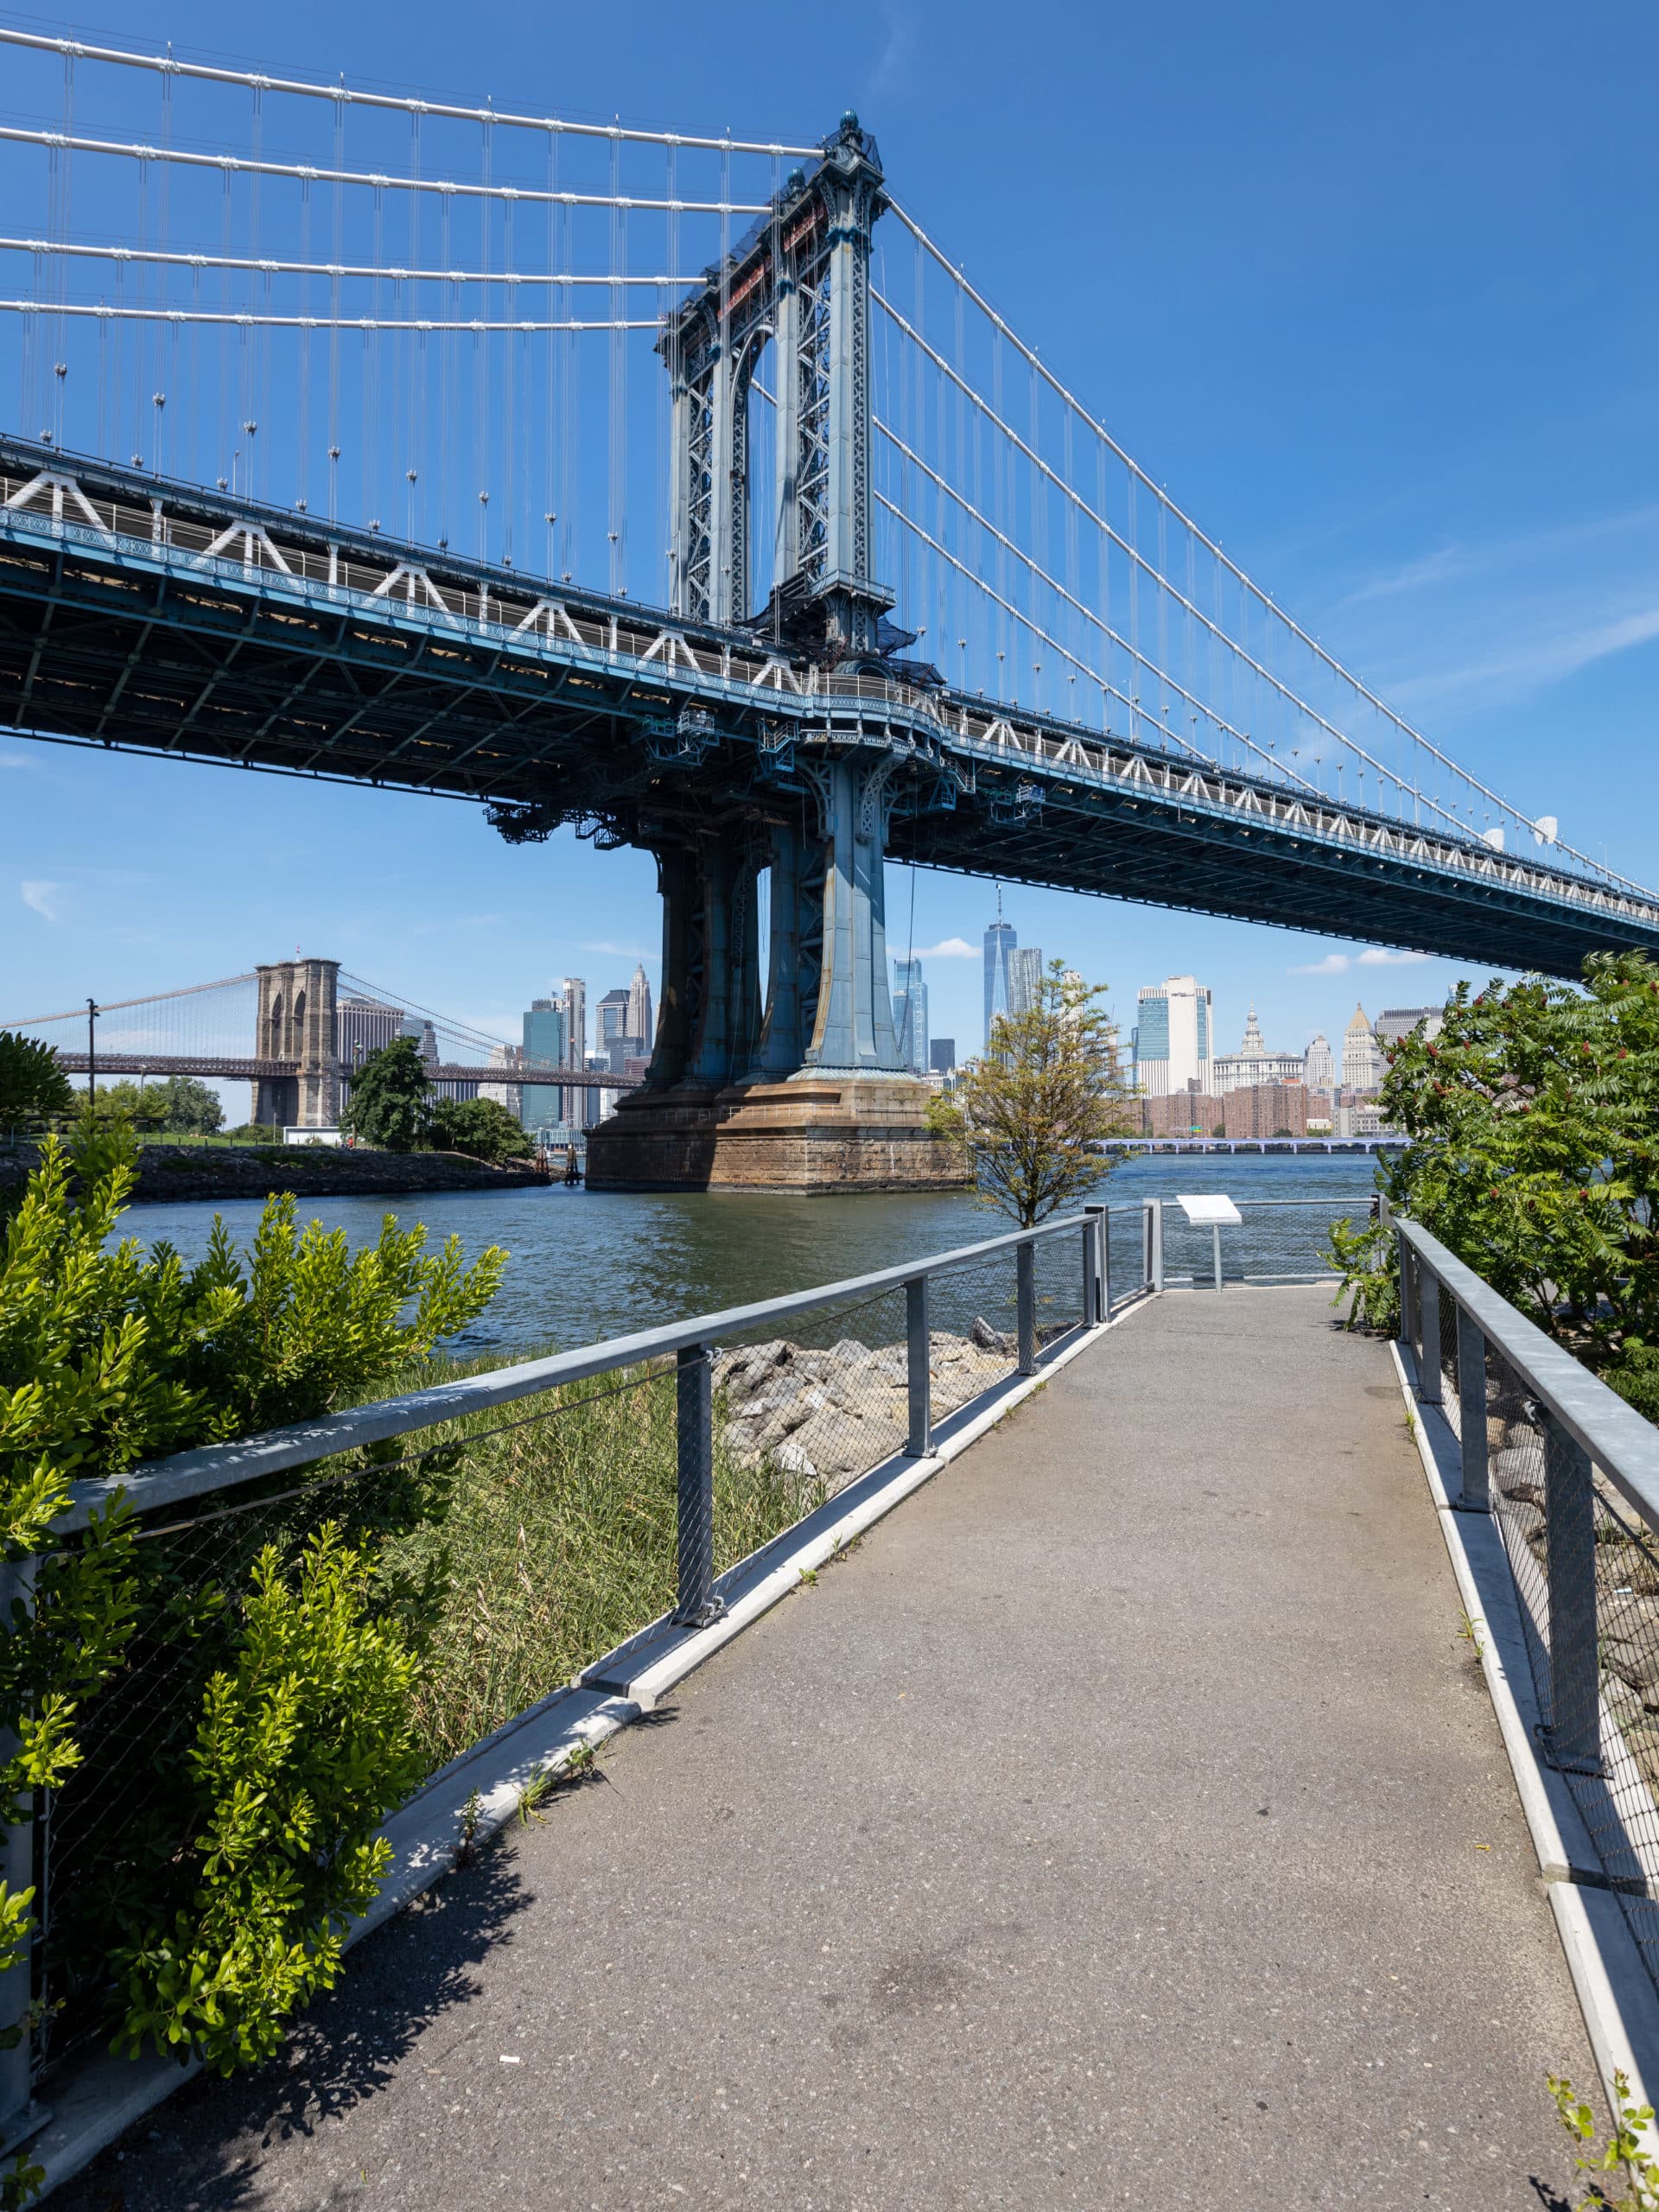 Pedestrian Bridge by the water on a sunny day. The Manhattan and Brooklyn Bridges are seen in the distance.